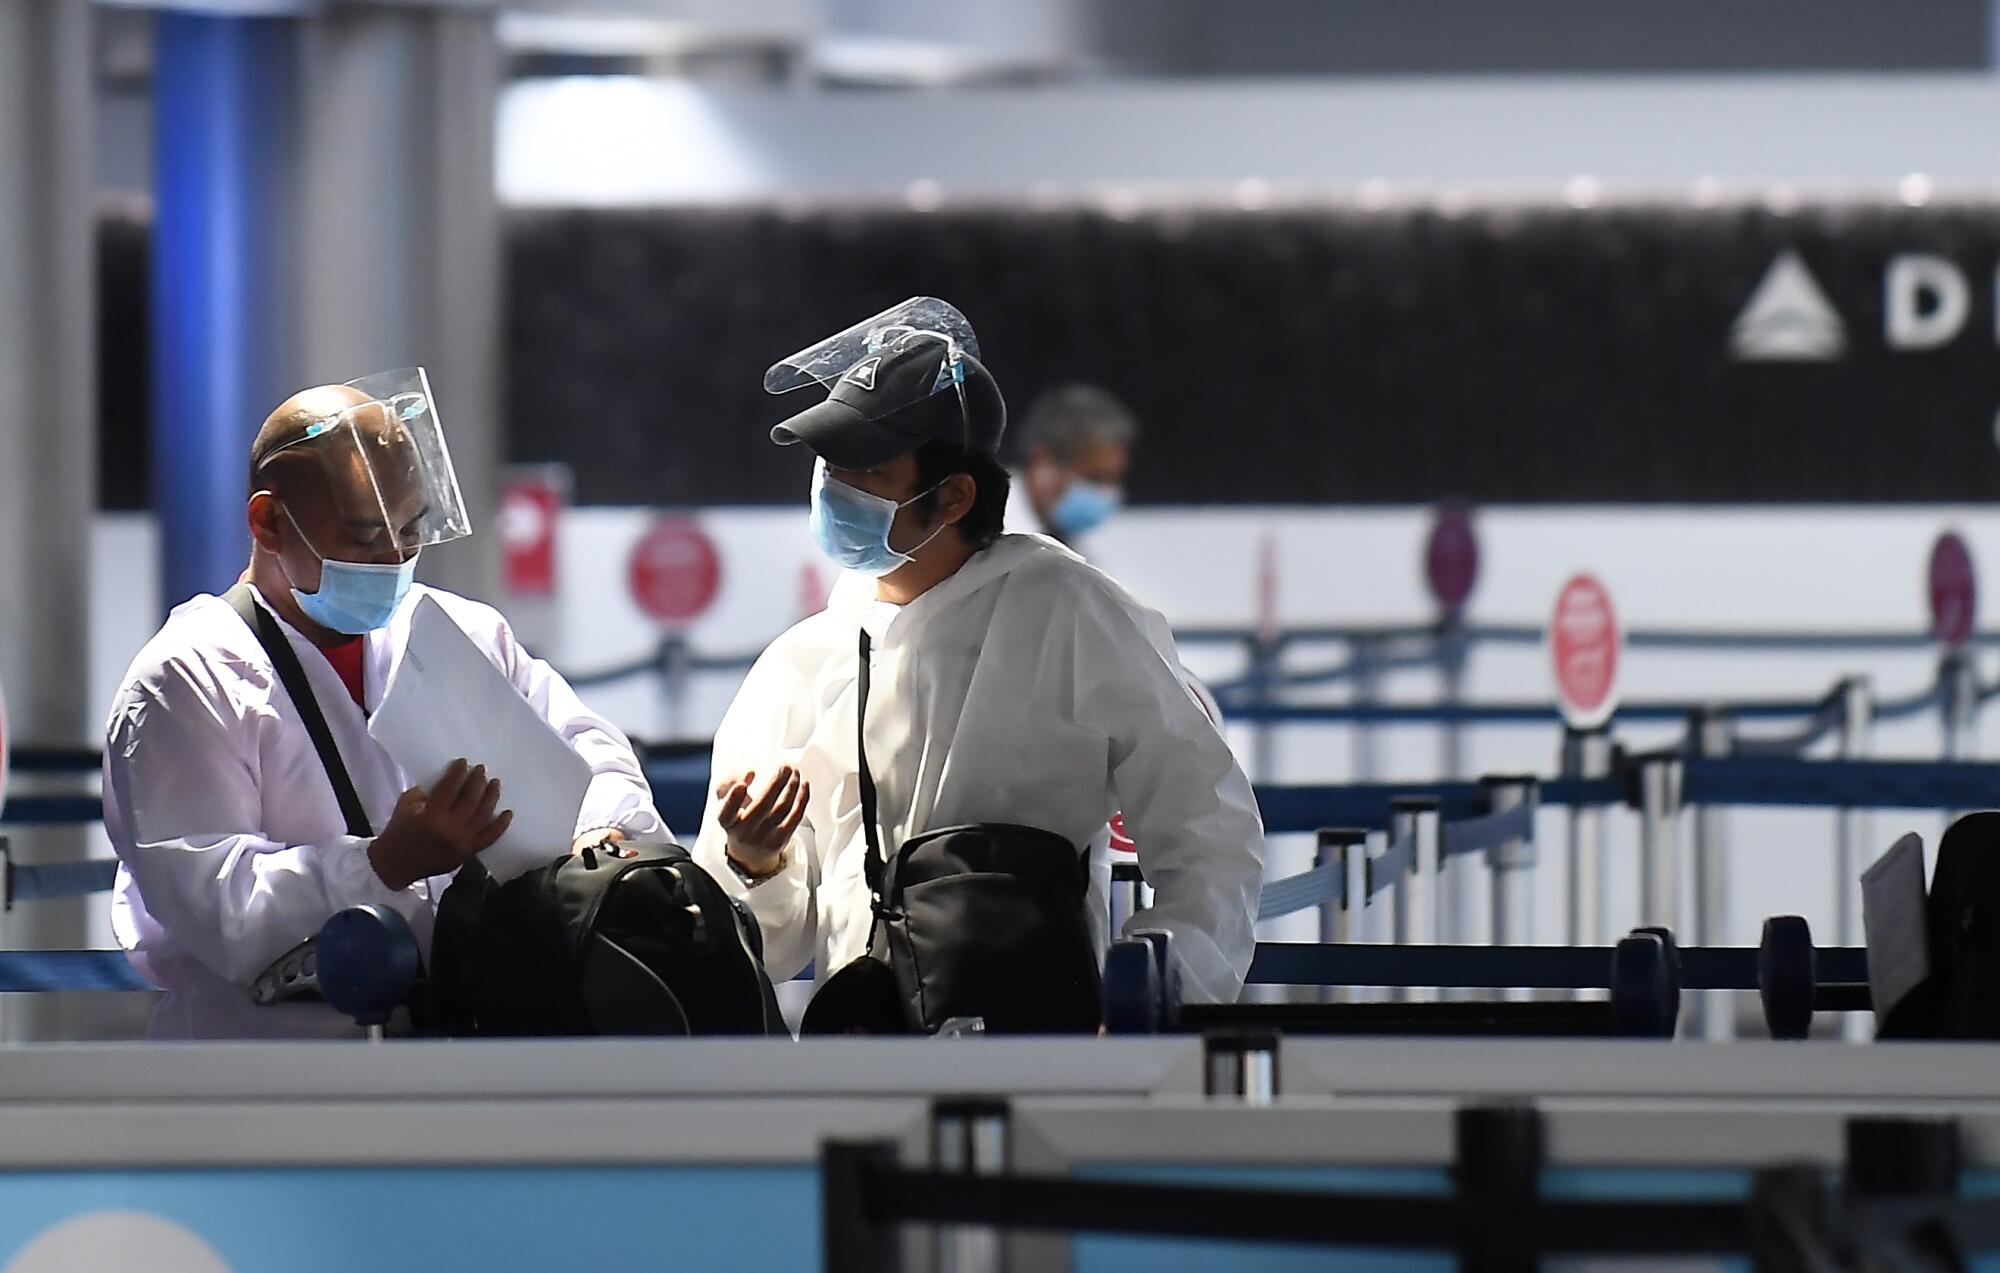 Travelers wearing fully body suits and mask prepare to head to their gate at Terminal 2 at LAX Friday.  